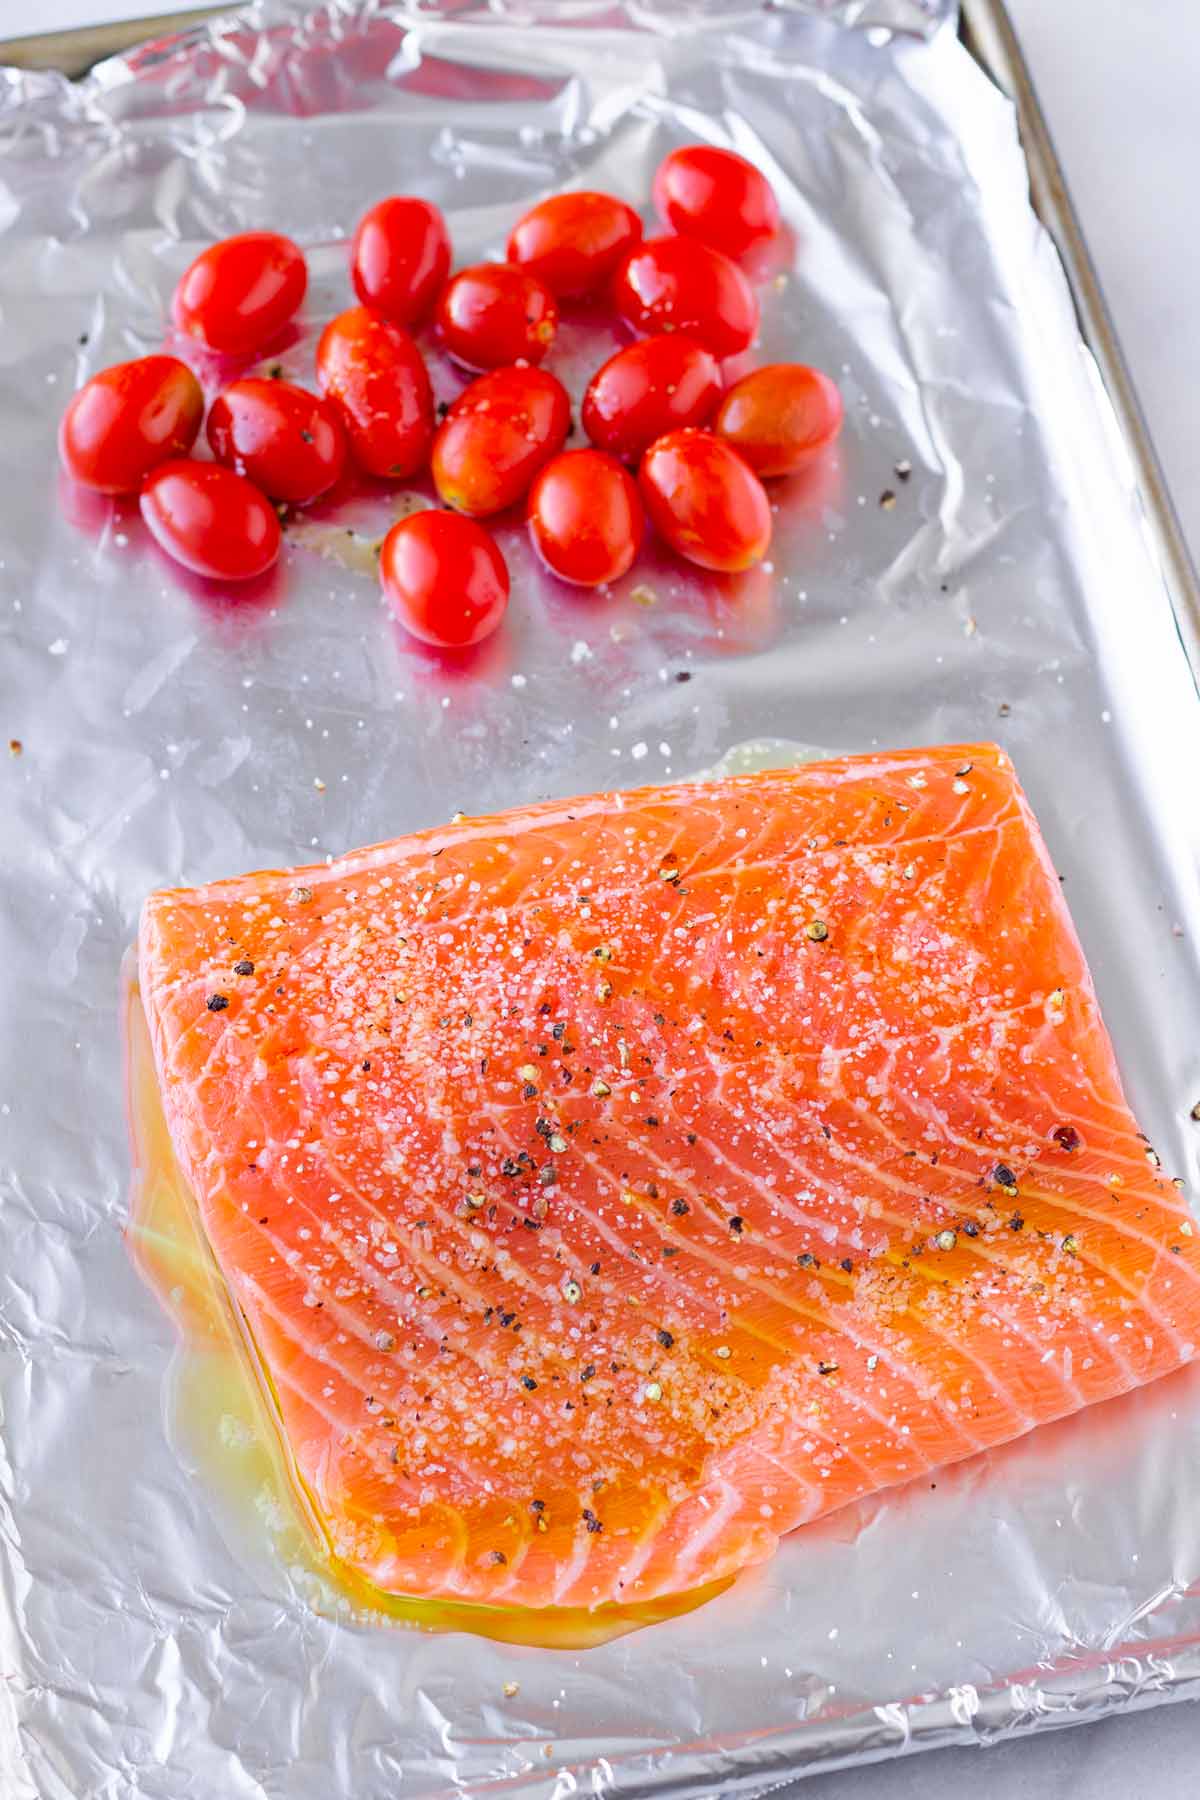 an unbaked salmon filet and cherry tomatoes on sheet pan